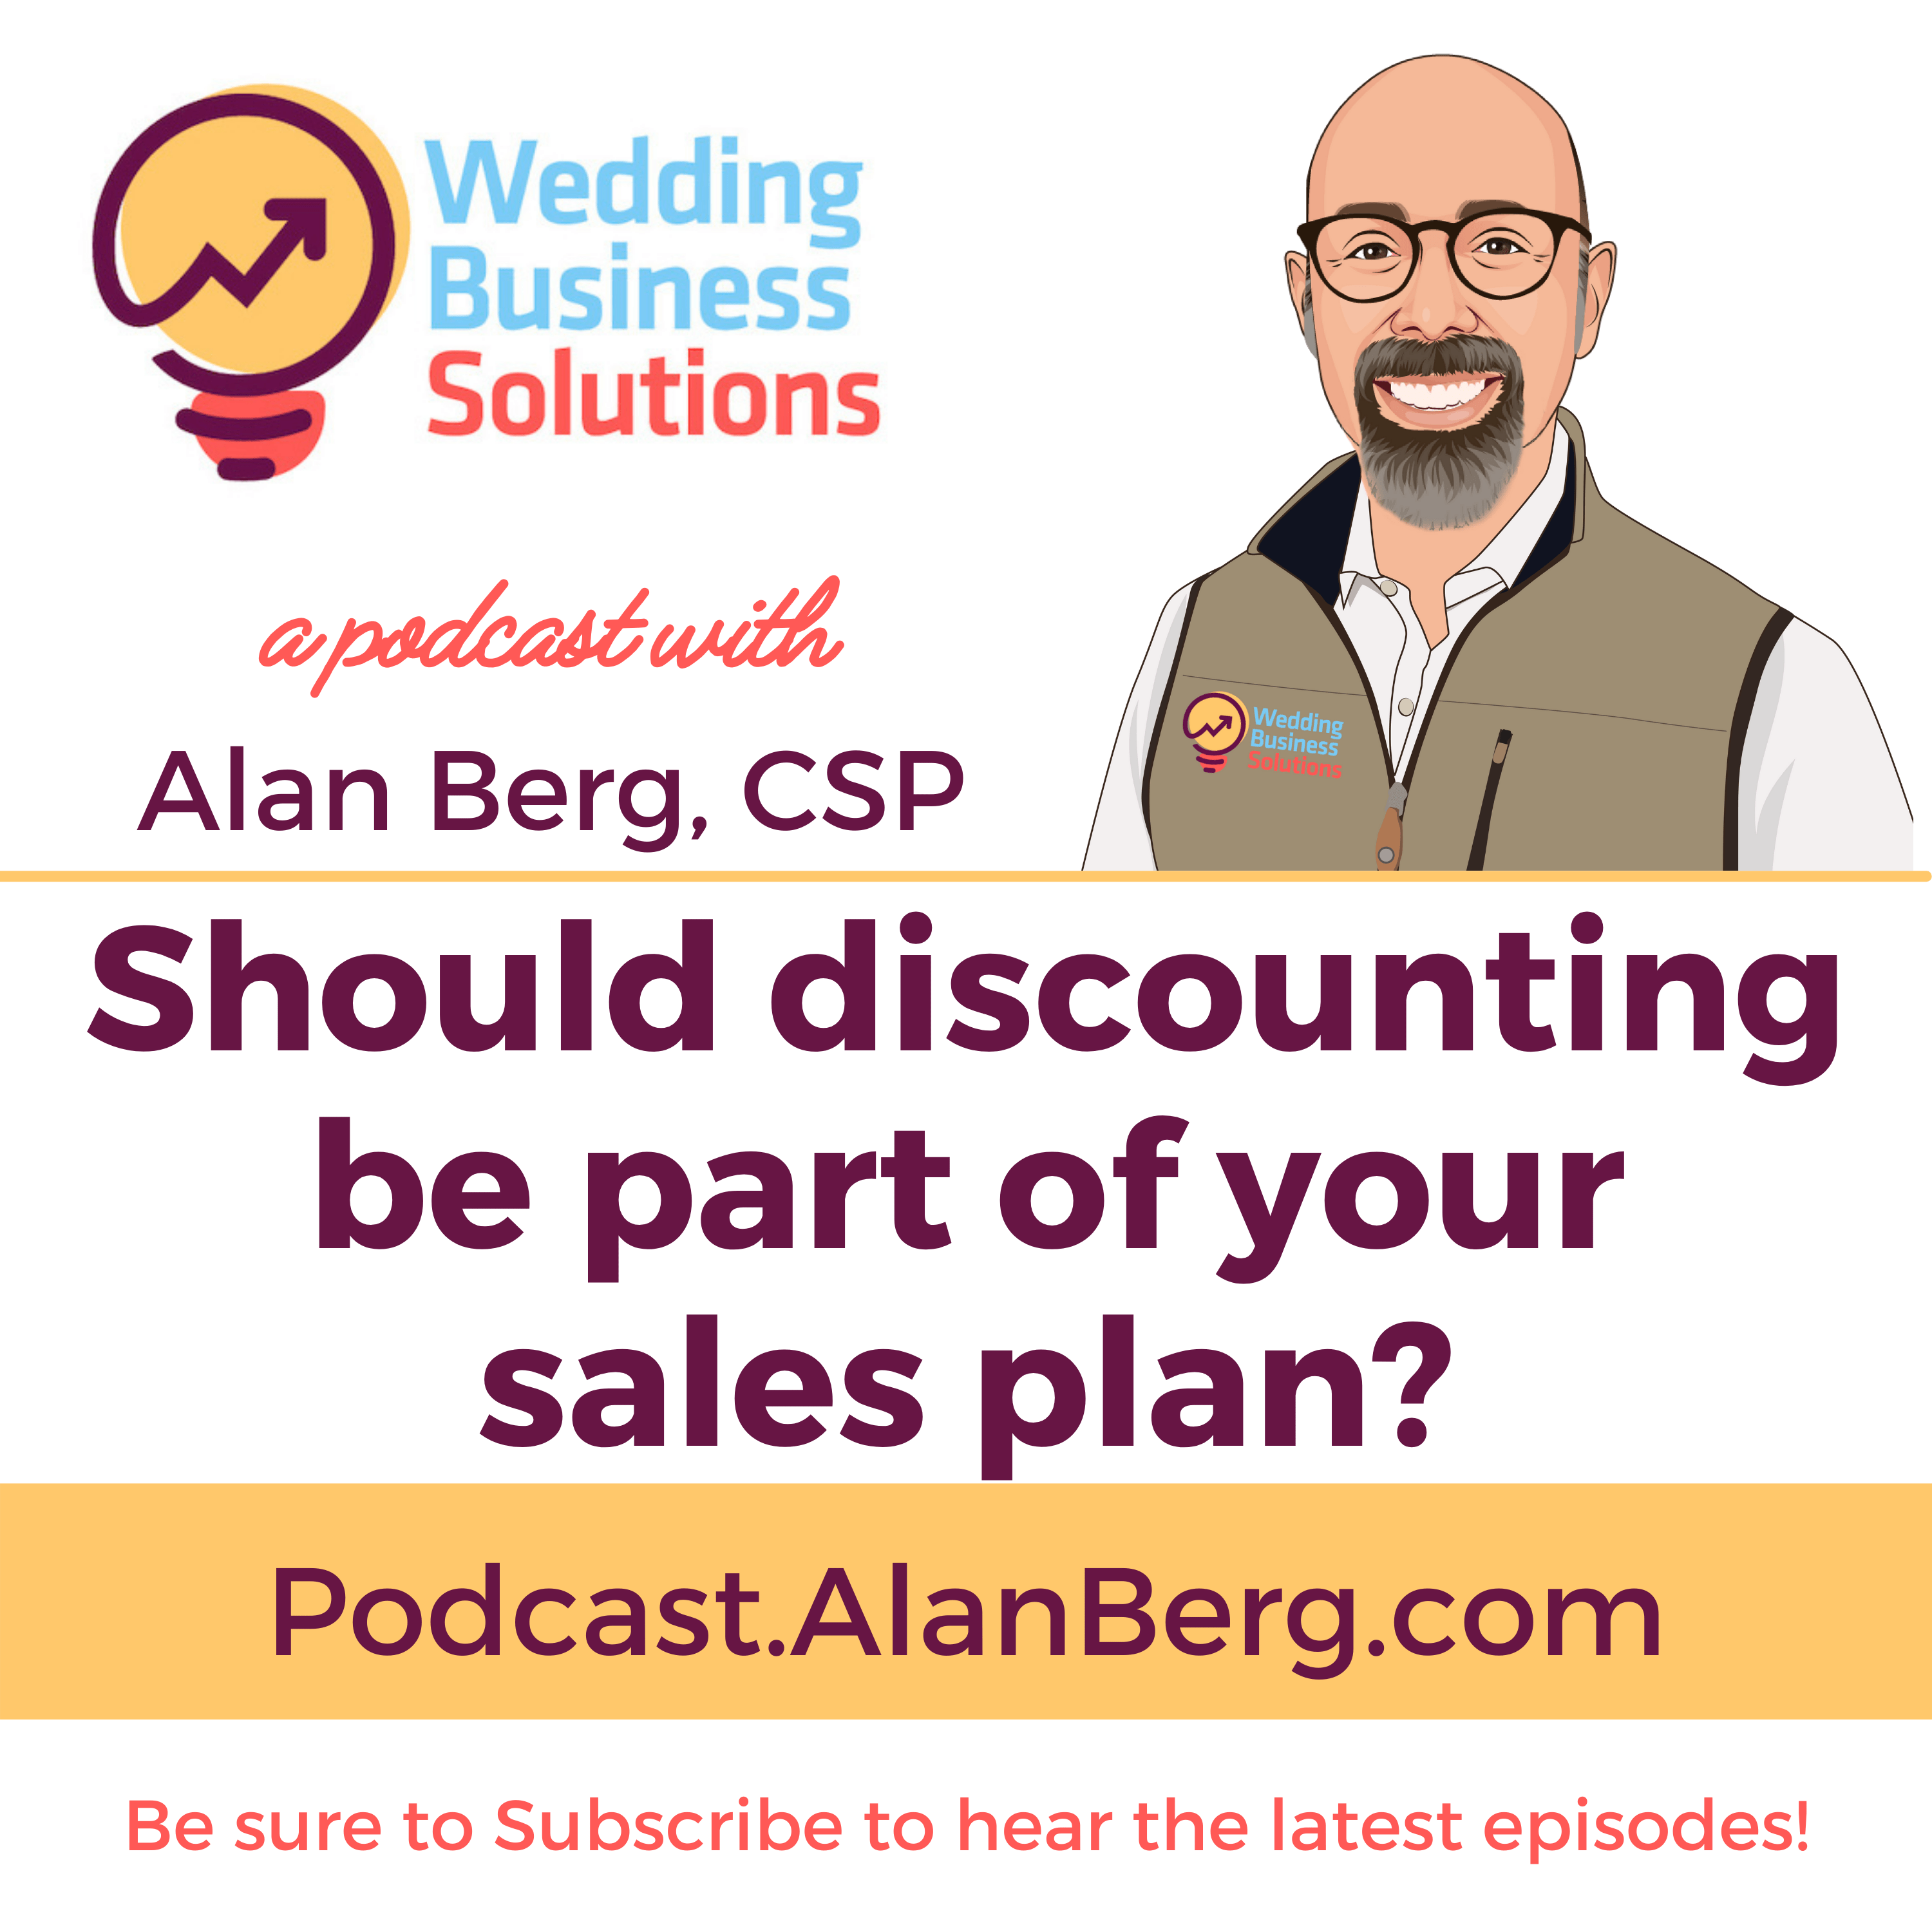 Should discounting be part of your sales plan? - Alan Berg CSP, Wedding Business Solutions Podcast